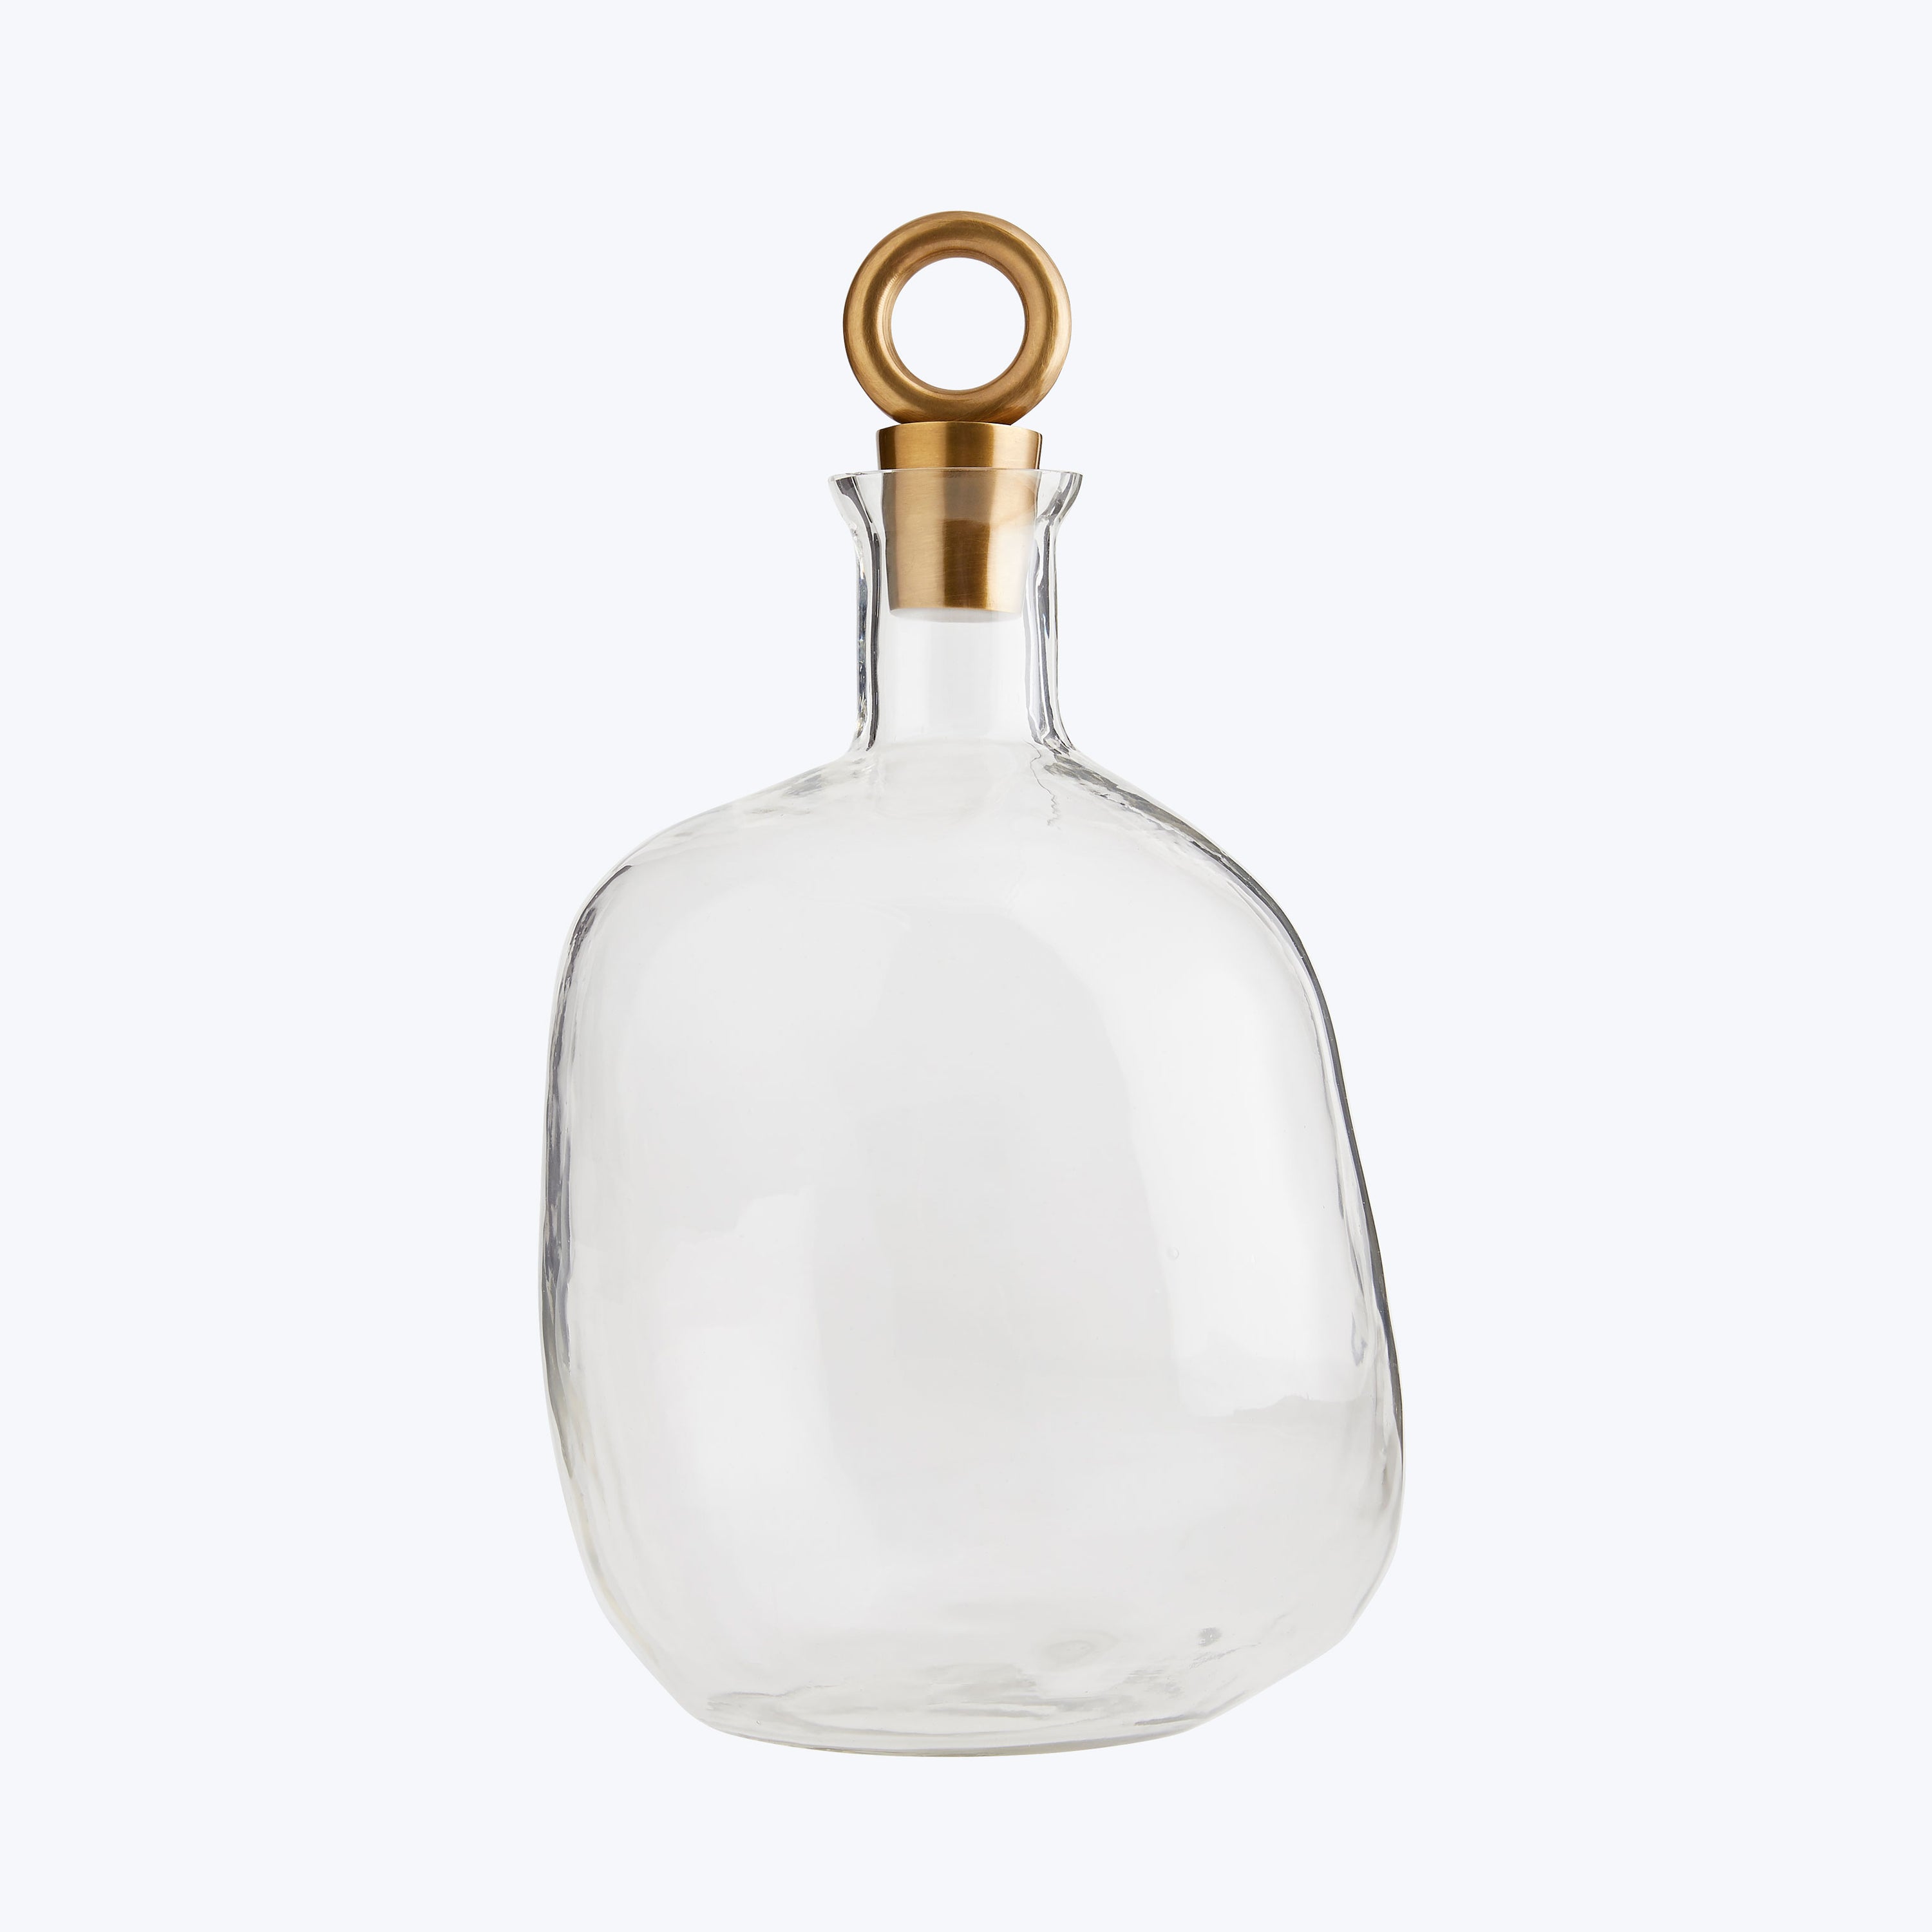 Elegant glass decanter with gold-toned stopper, perfect for beverages.